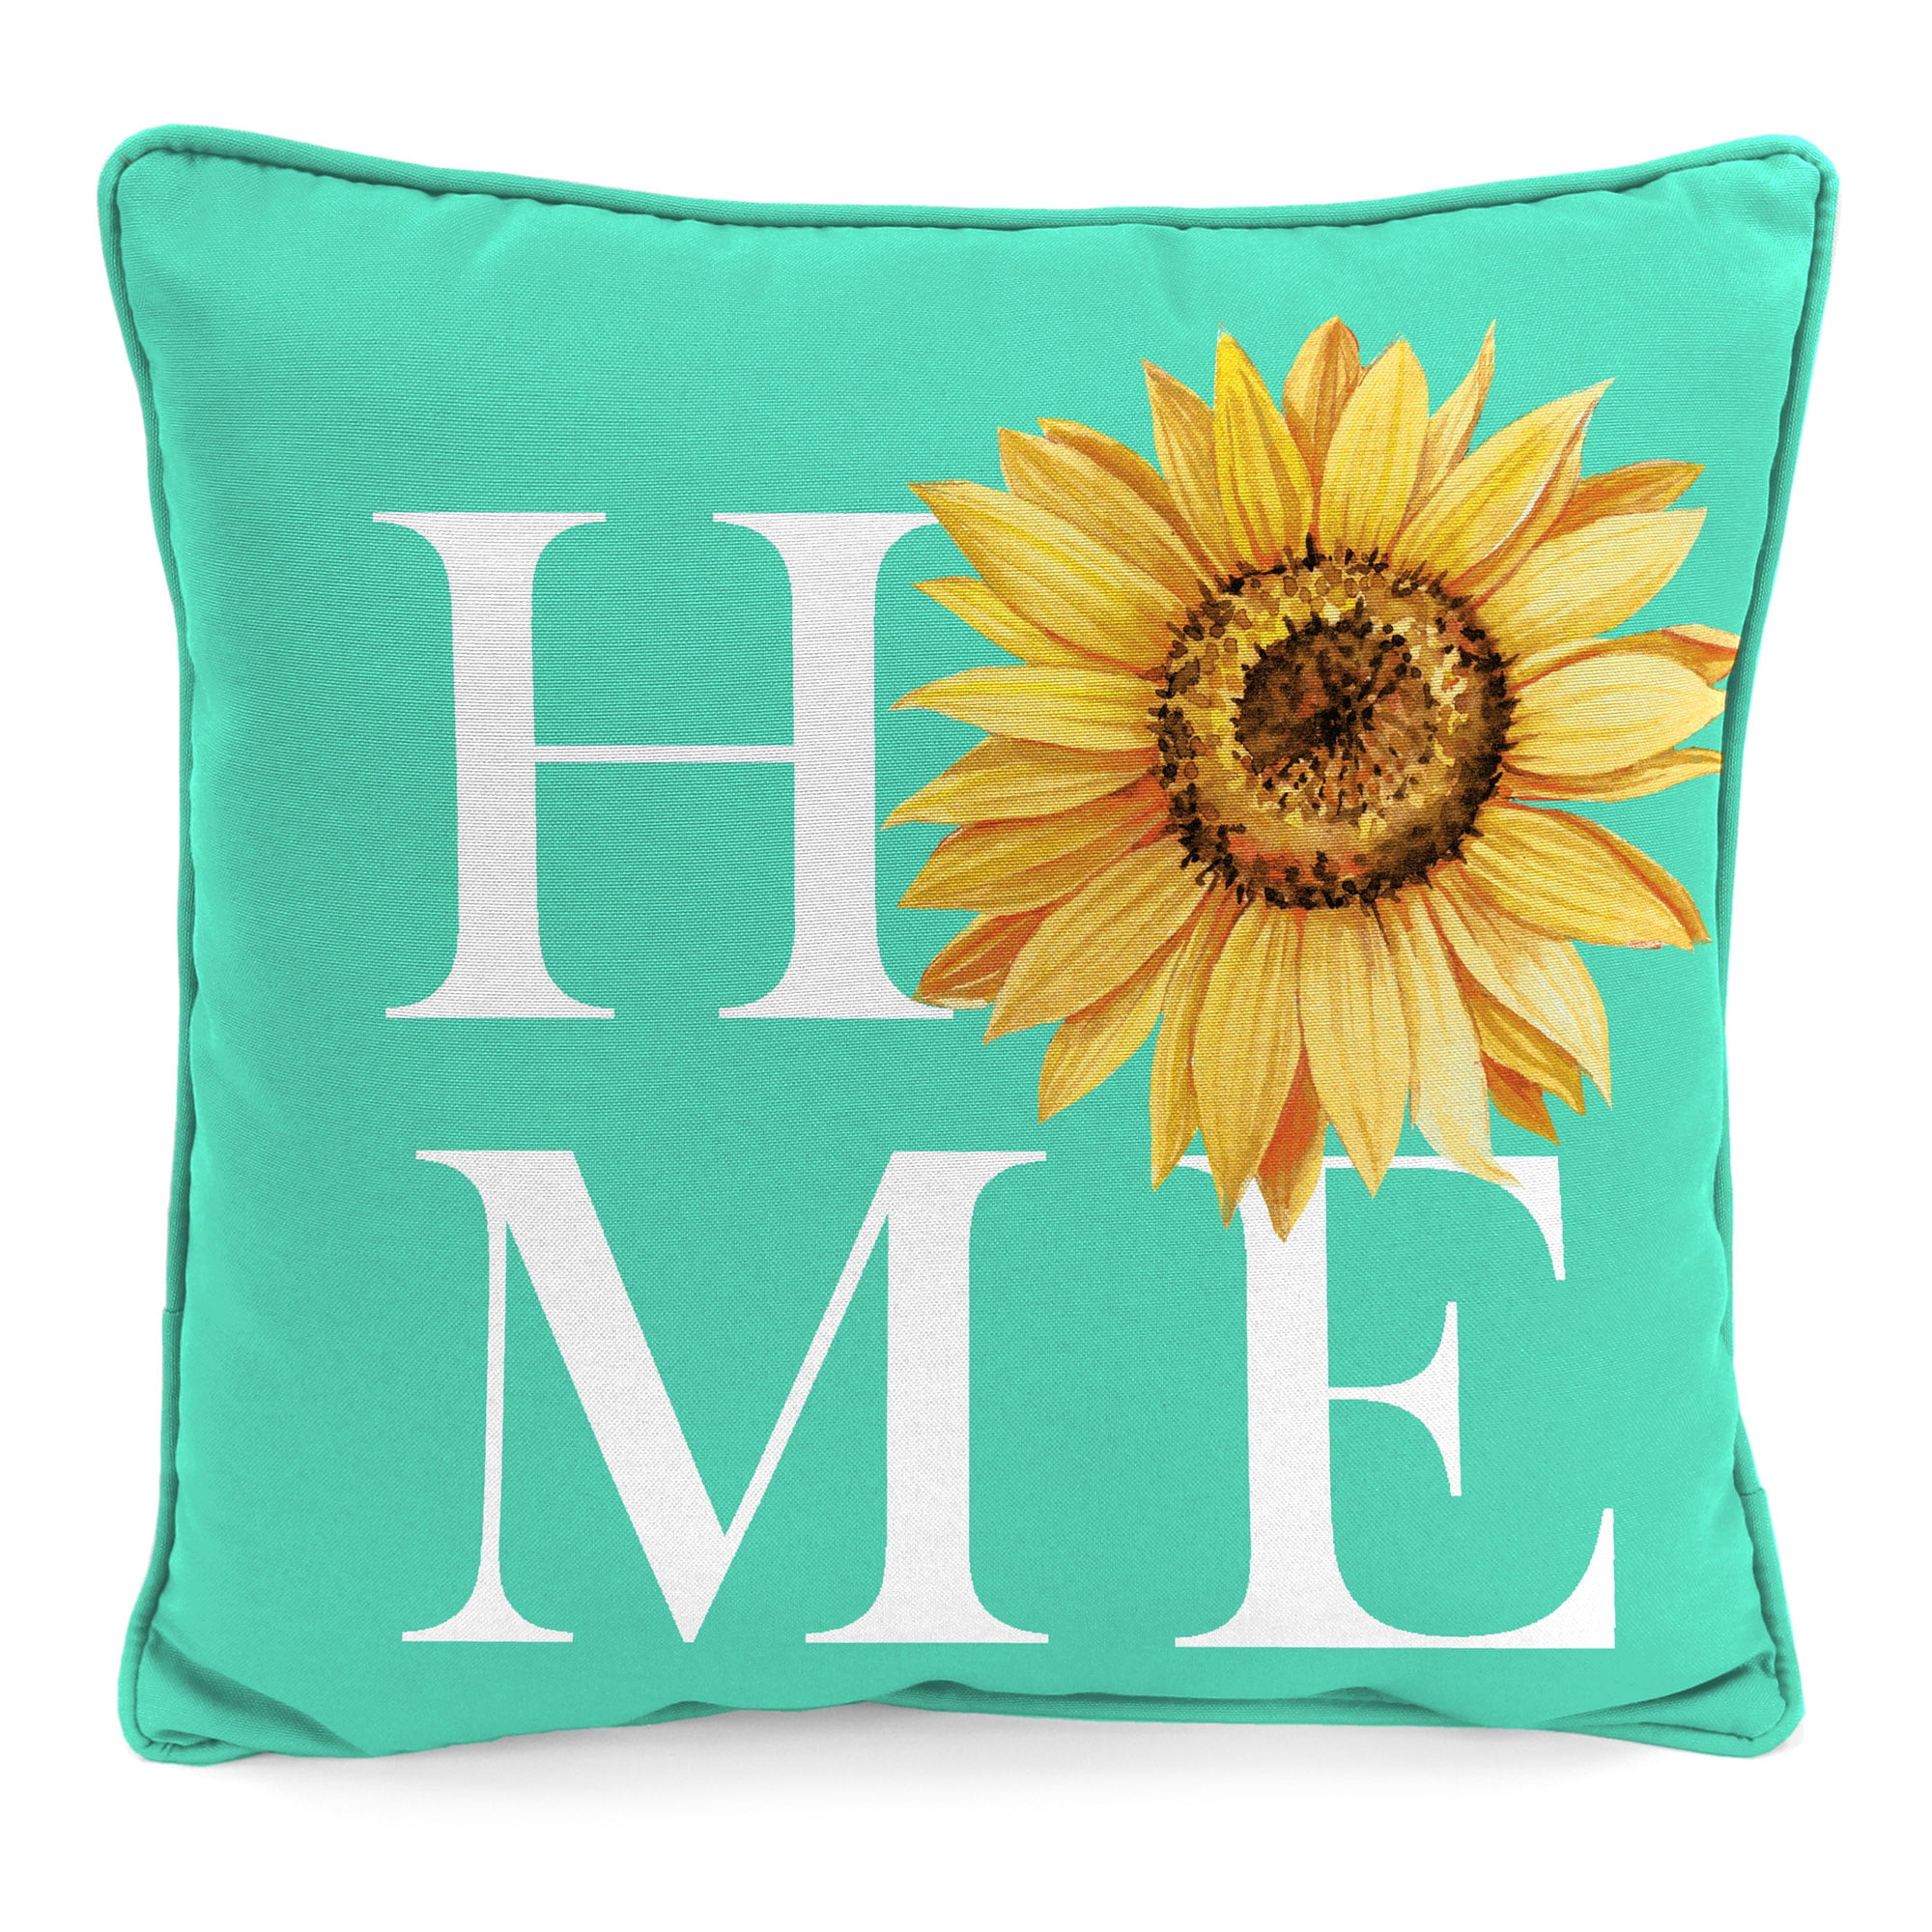 Mainstays Home Sunflower Reversible Outdoor Throw Pillow, 16", Turquoise Novelty and Floral